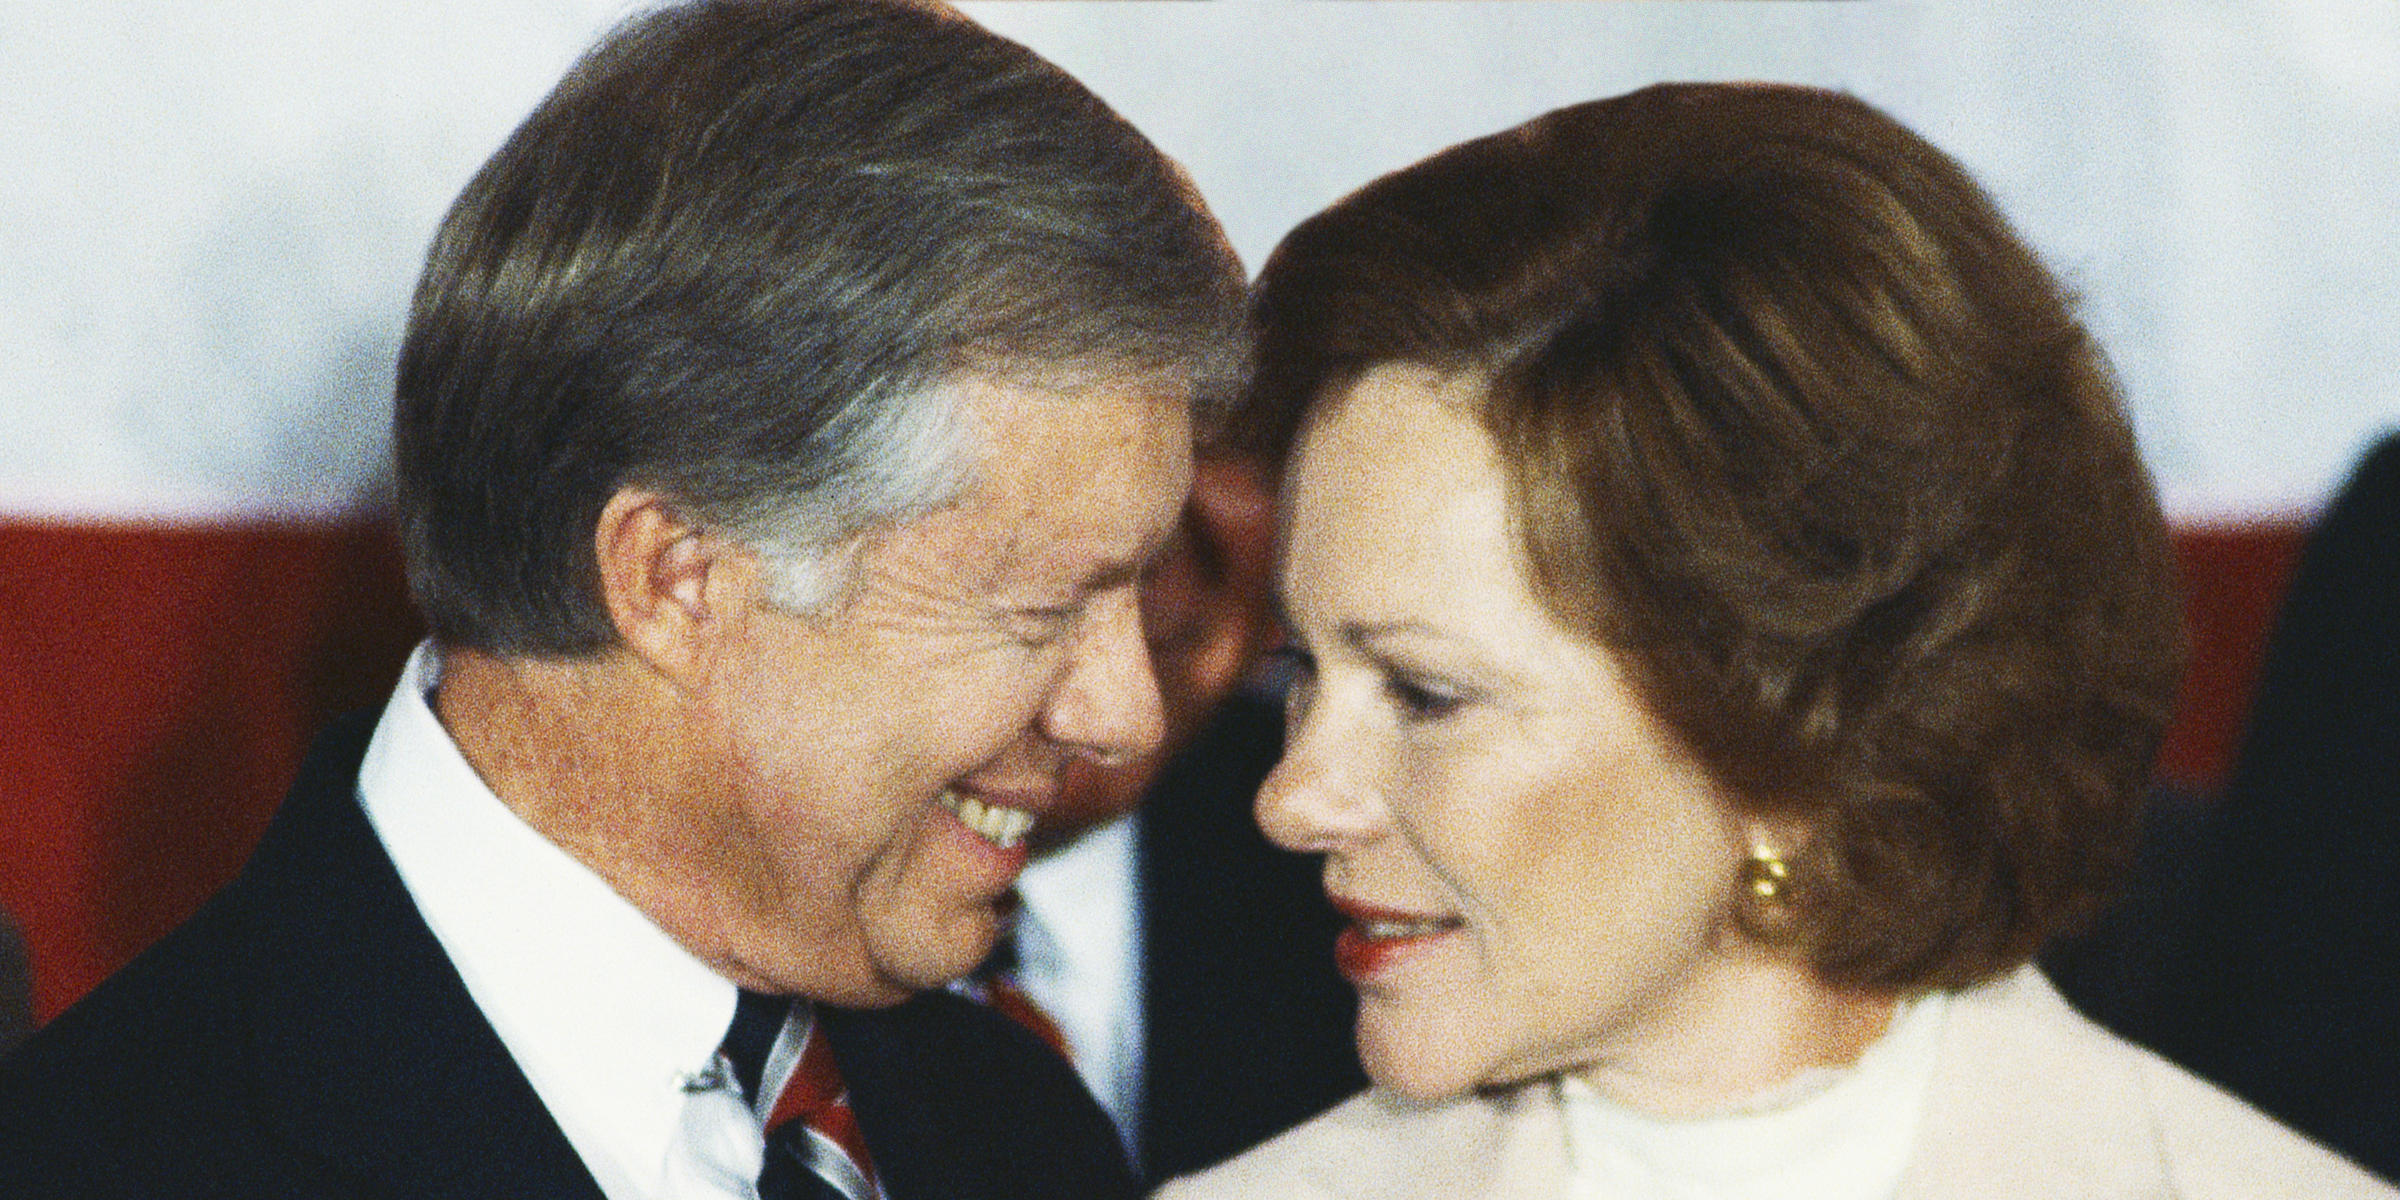 Former U.S. President Jimmy Carter and former U.S. First Lady Rosalynn Carter | Source: Getty Images